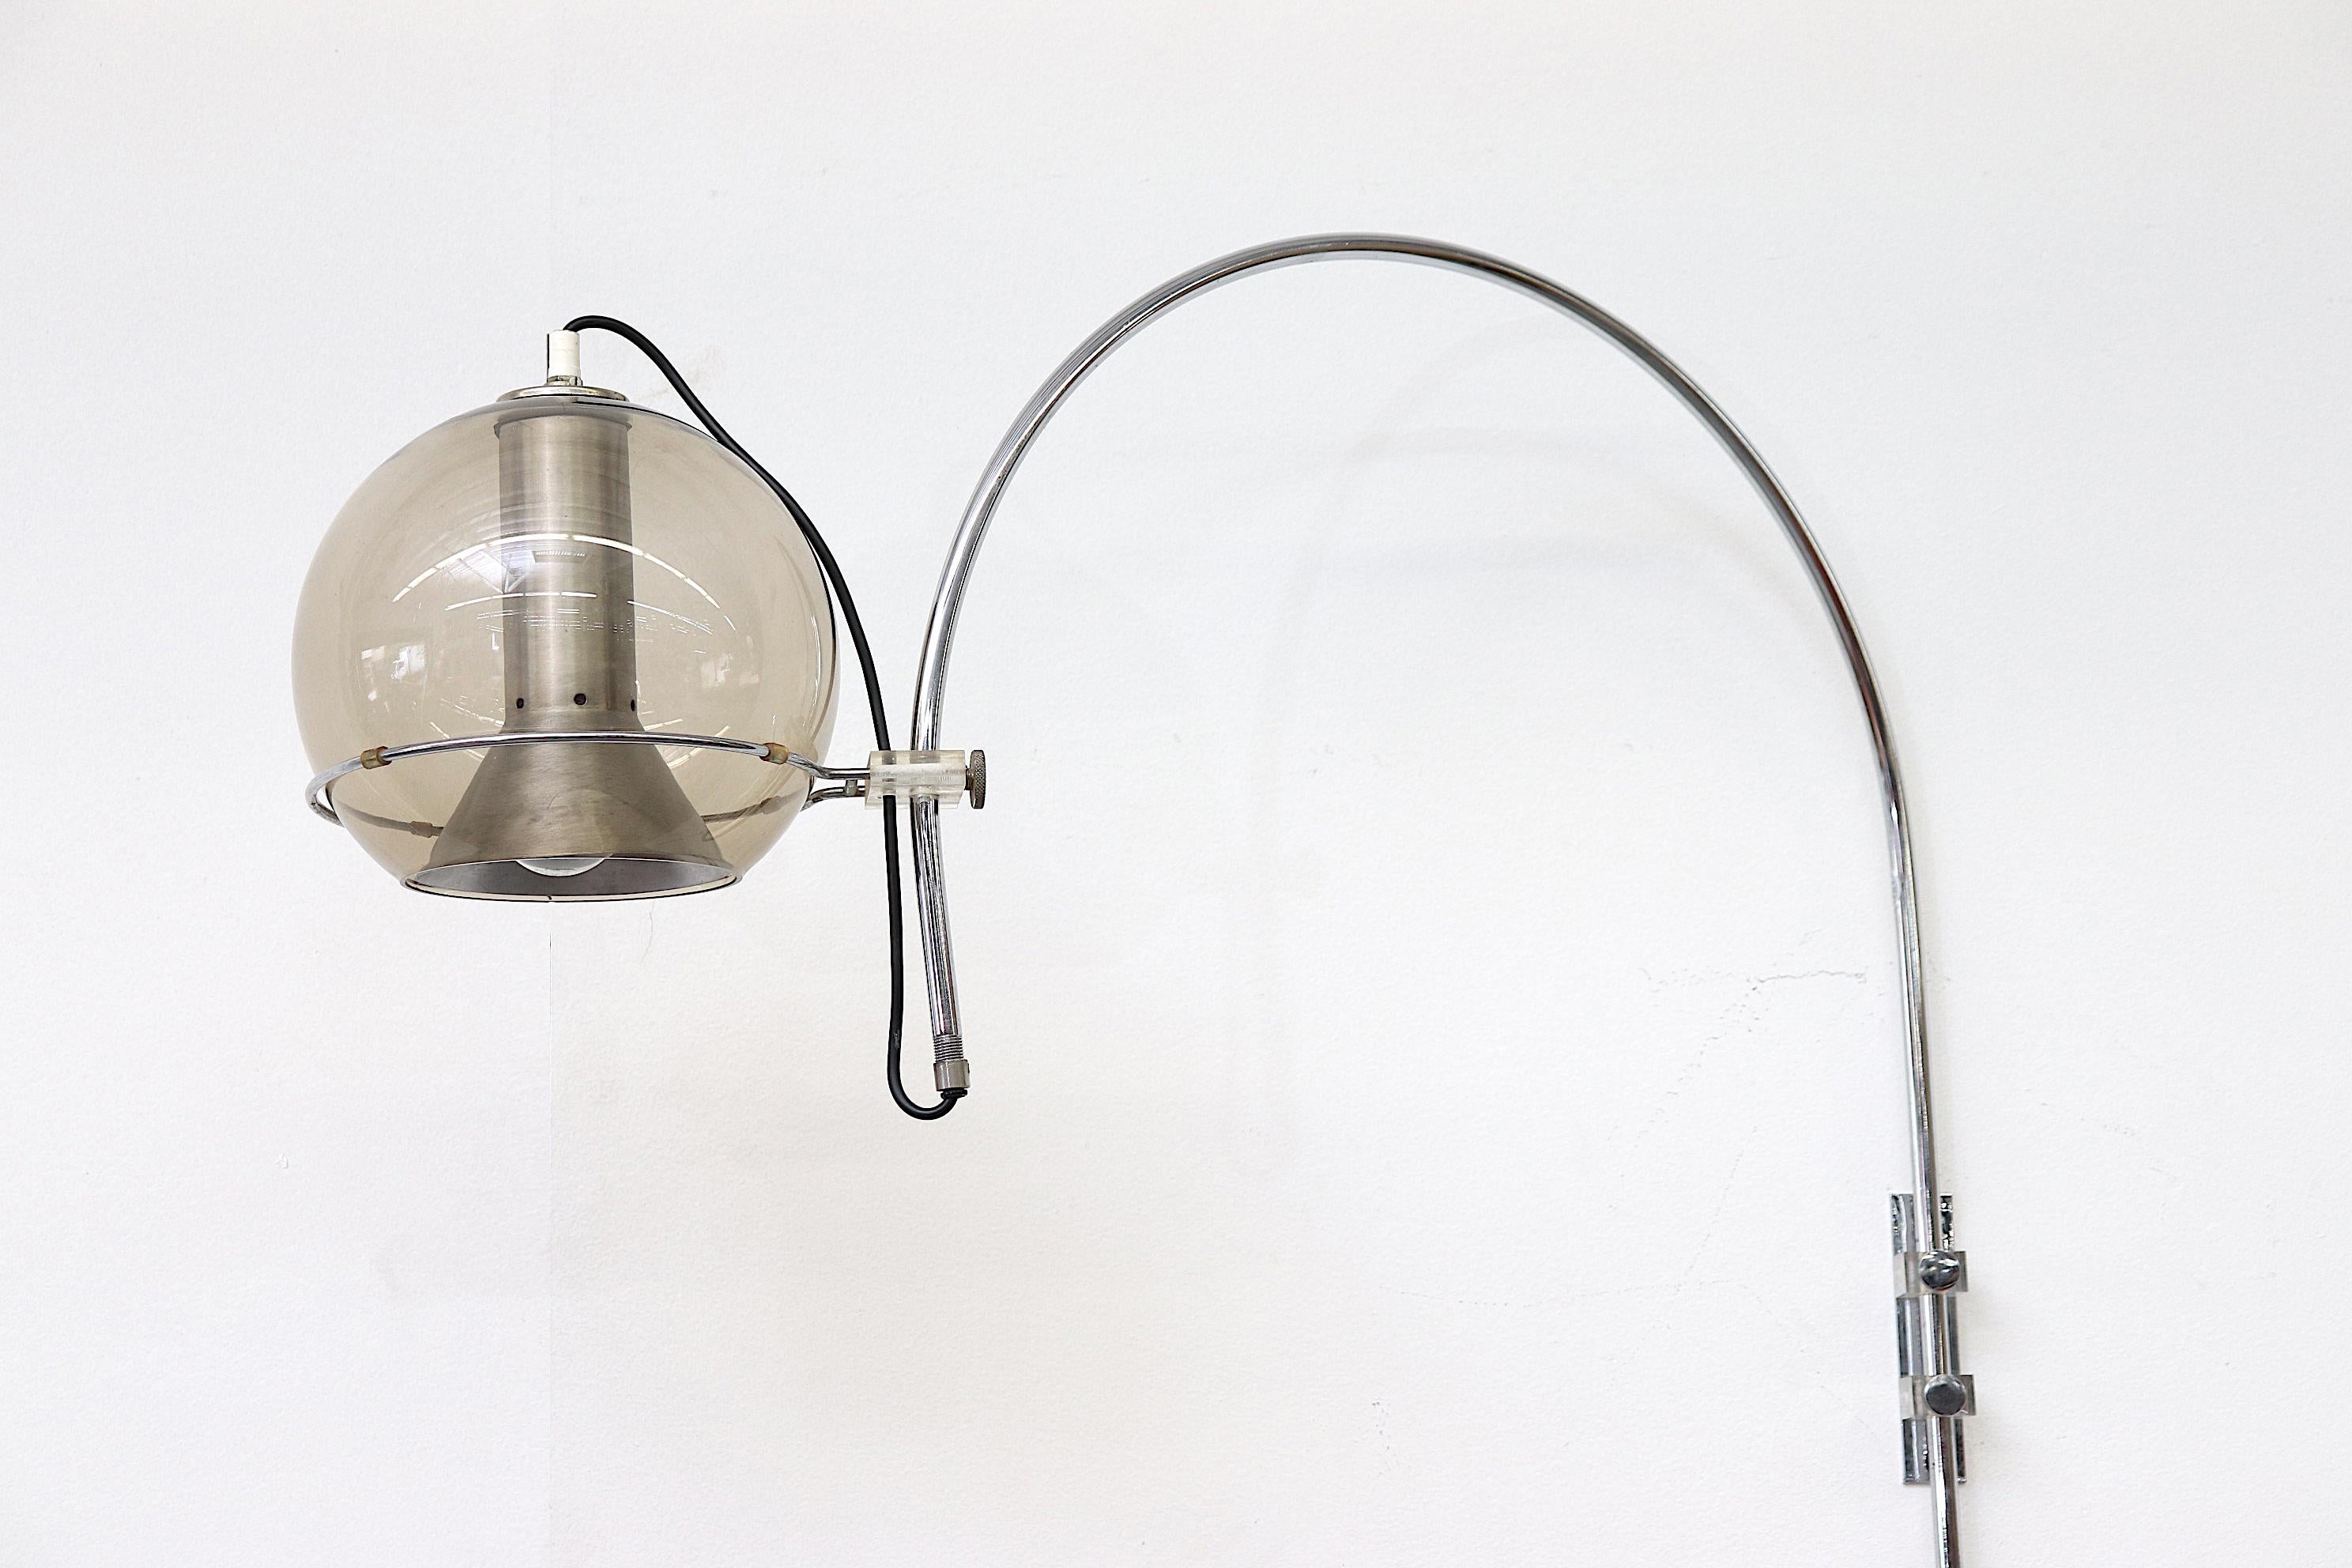 Raak globe wall mount arc light by Frank Ligtelijn with smoked glass globe shade and signature aluminum funnel insert. Height-adjustable swing arm movement. Chrome with Lucite accents. In original condition.